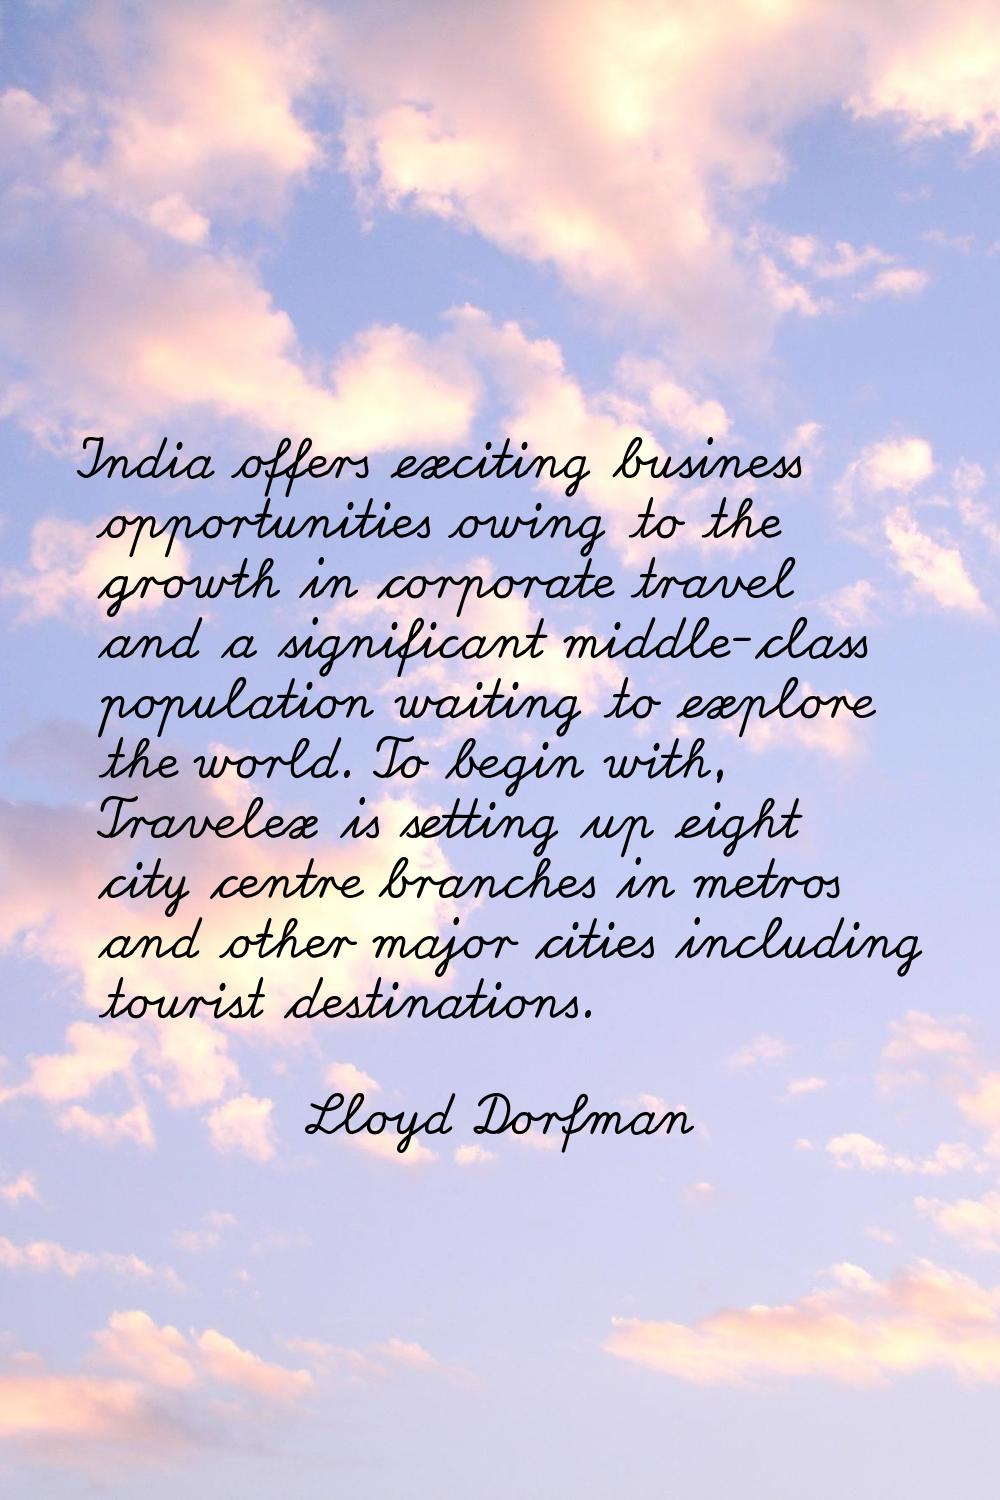 India offers exciting business opportunities owing to the growth in corporate travel and a signific